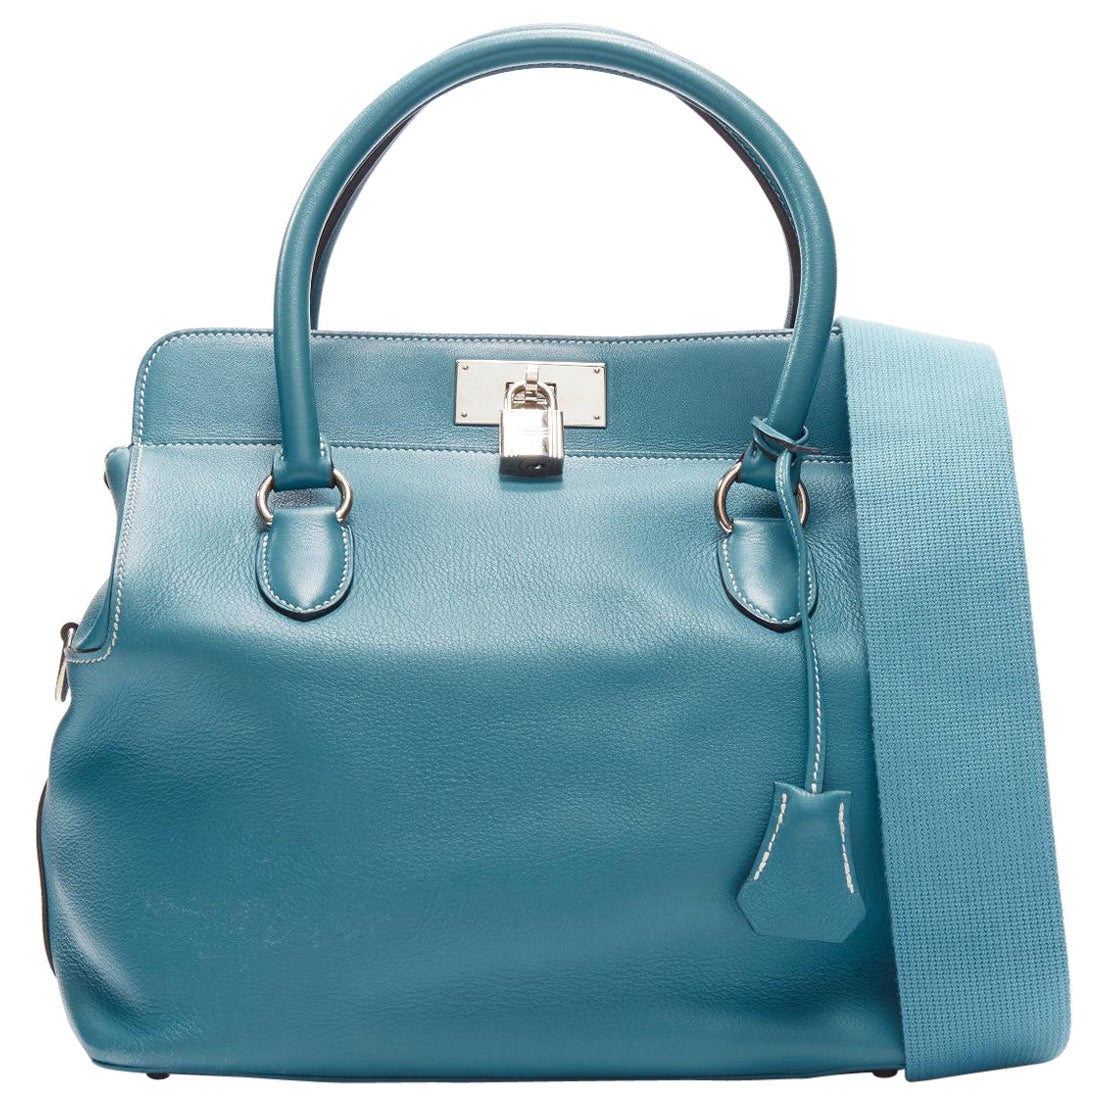 HERMES Toolbox 26 teal blue grained leather SHW top handle satchel For Sale